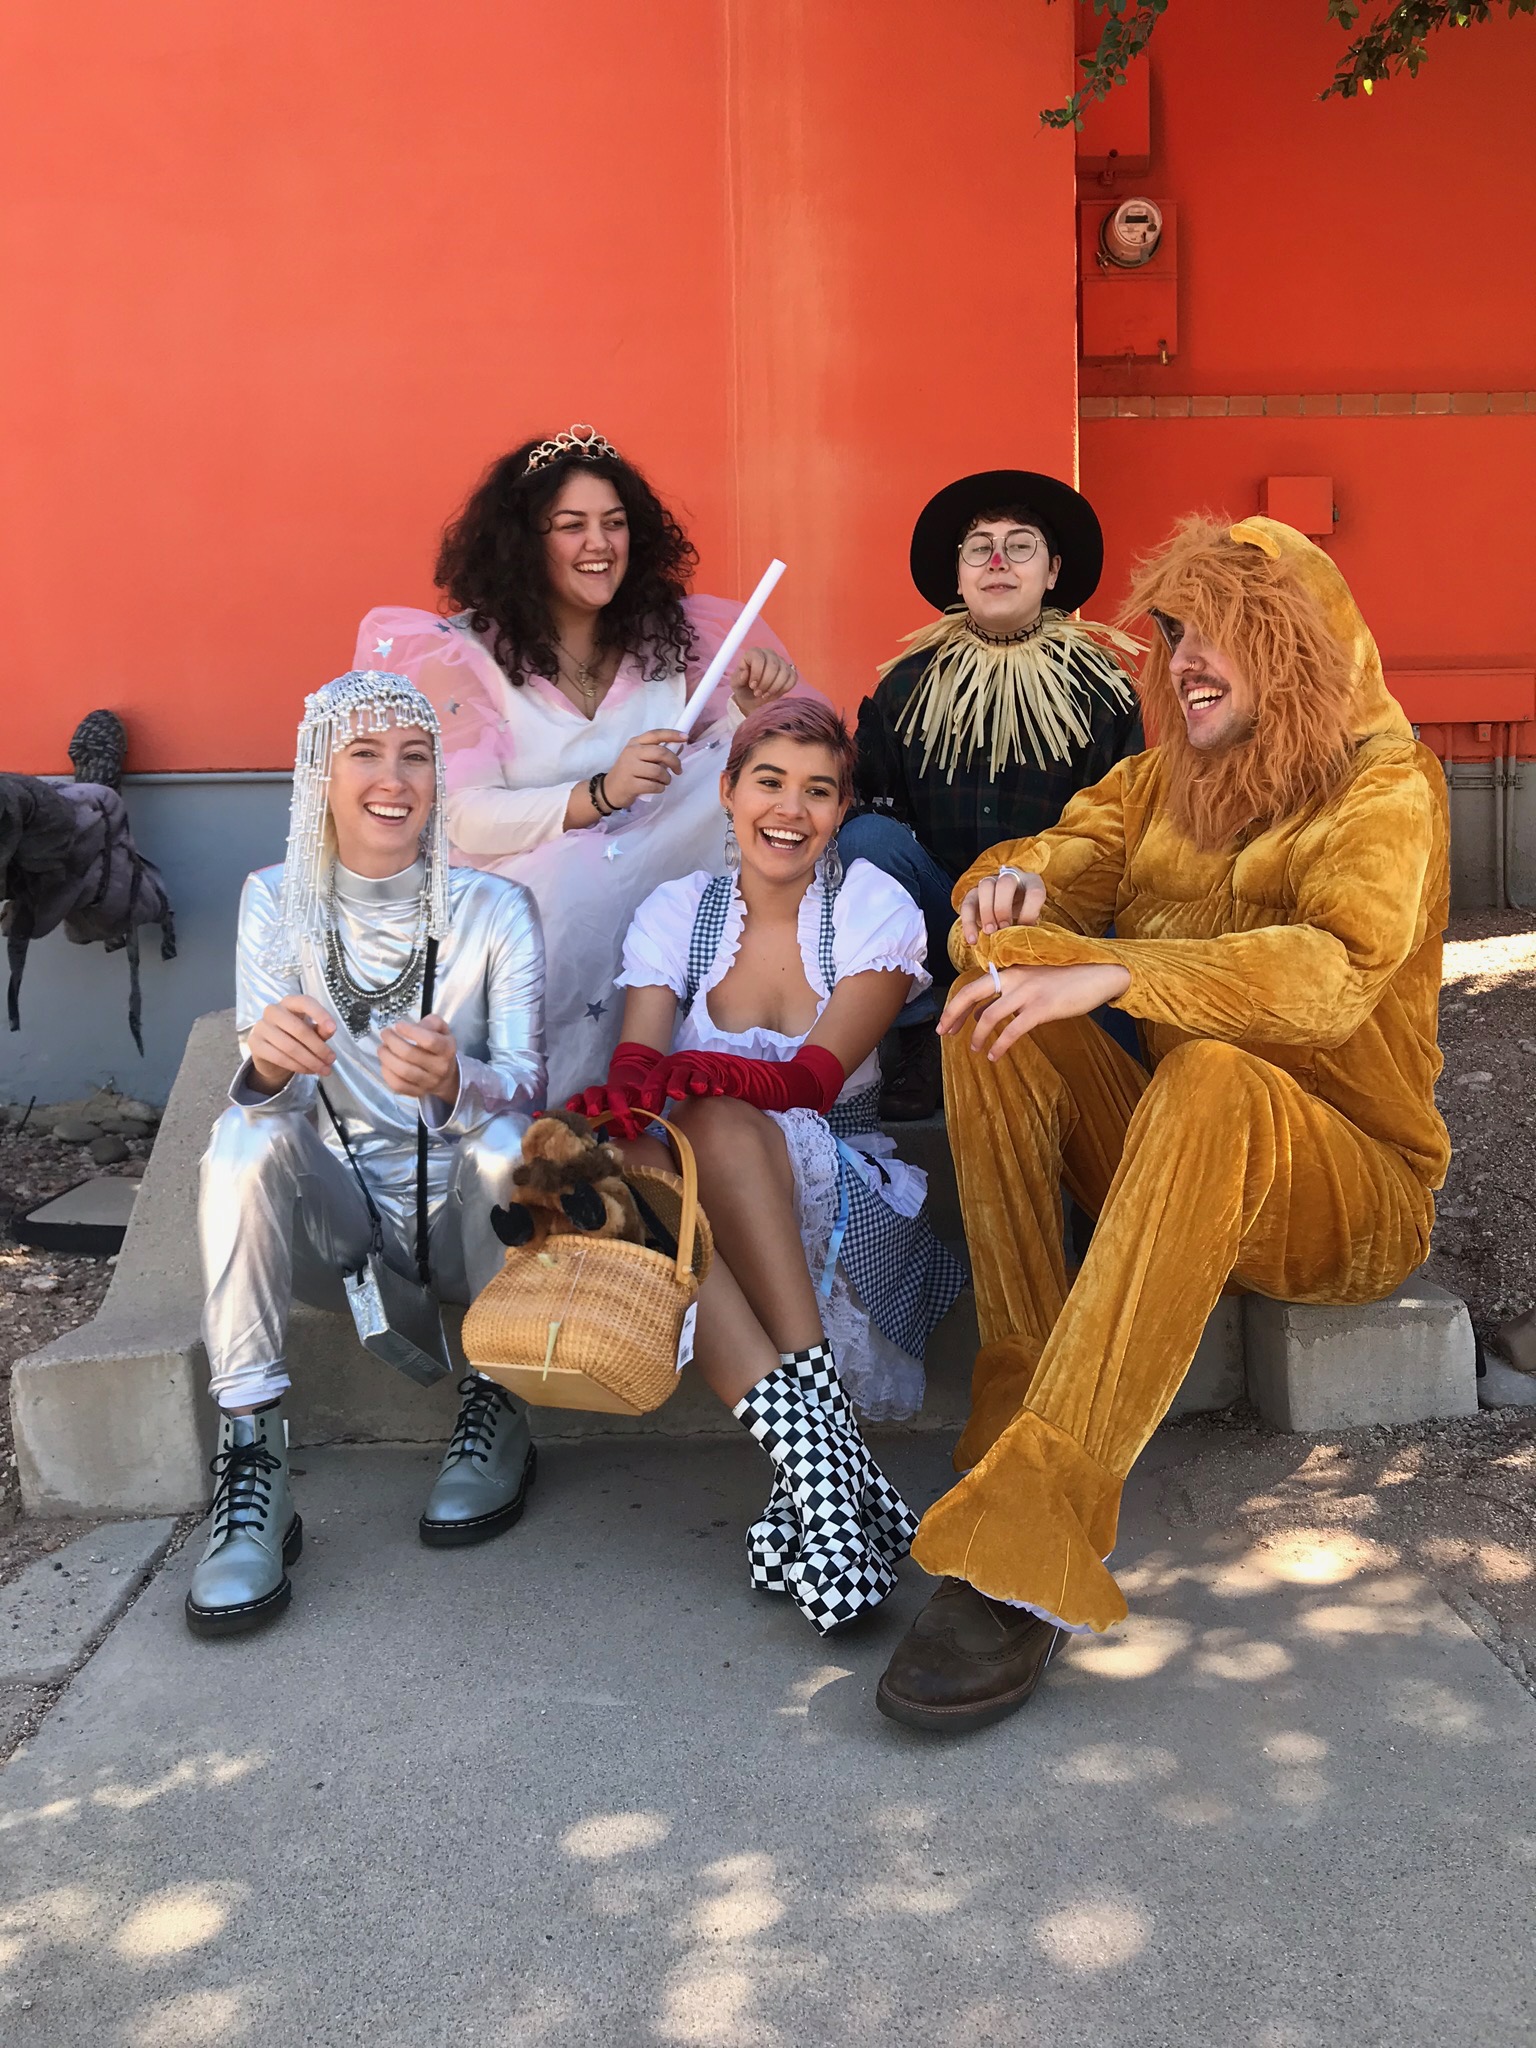 Wizard of Oz Group Costume, Glenda the Good WItch, Tin Man, Scarecrow, Cowardly Lion, Dorothy, Costumes for Halloween 2020